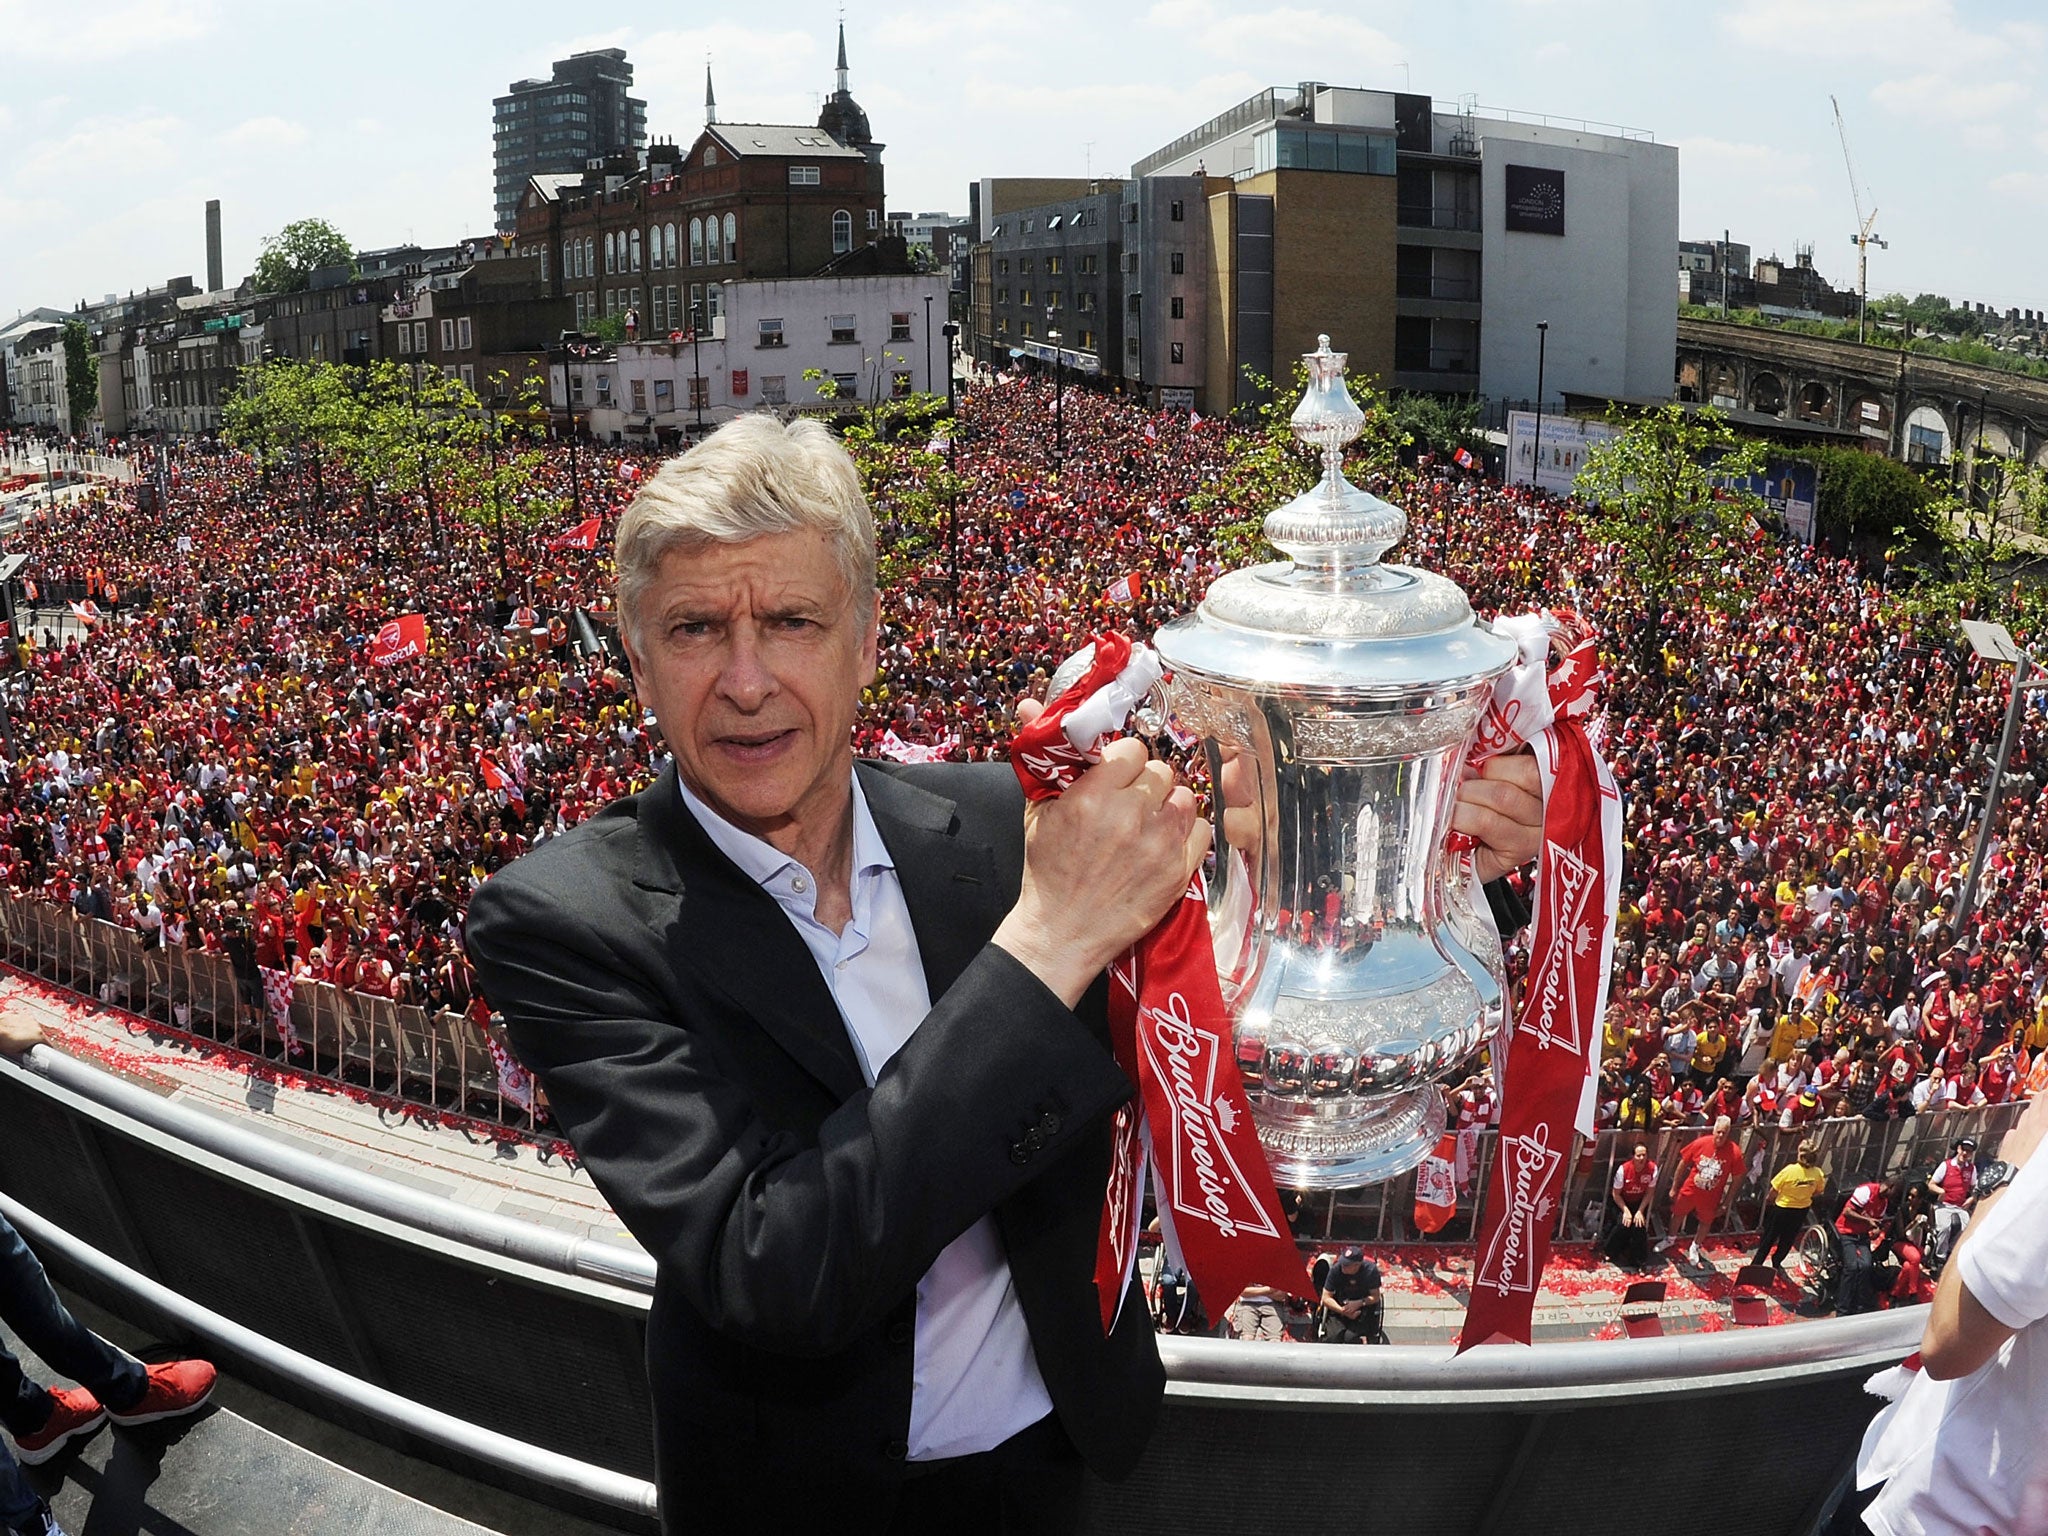 Arsenal manager Arsene Wenger poses with the trophy at the Victory Parade